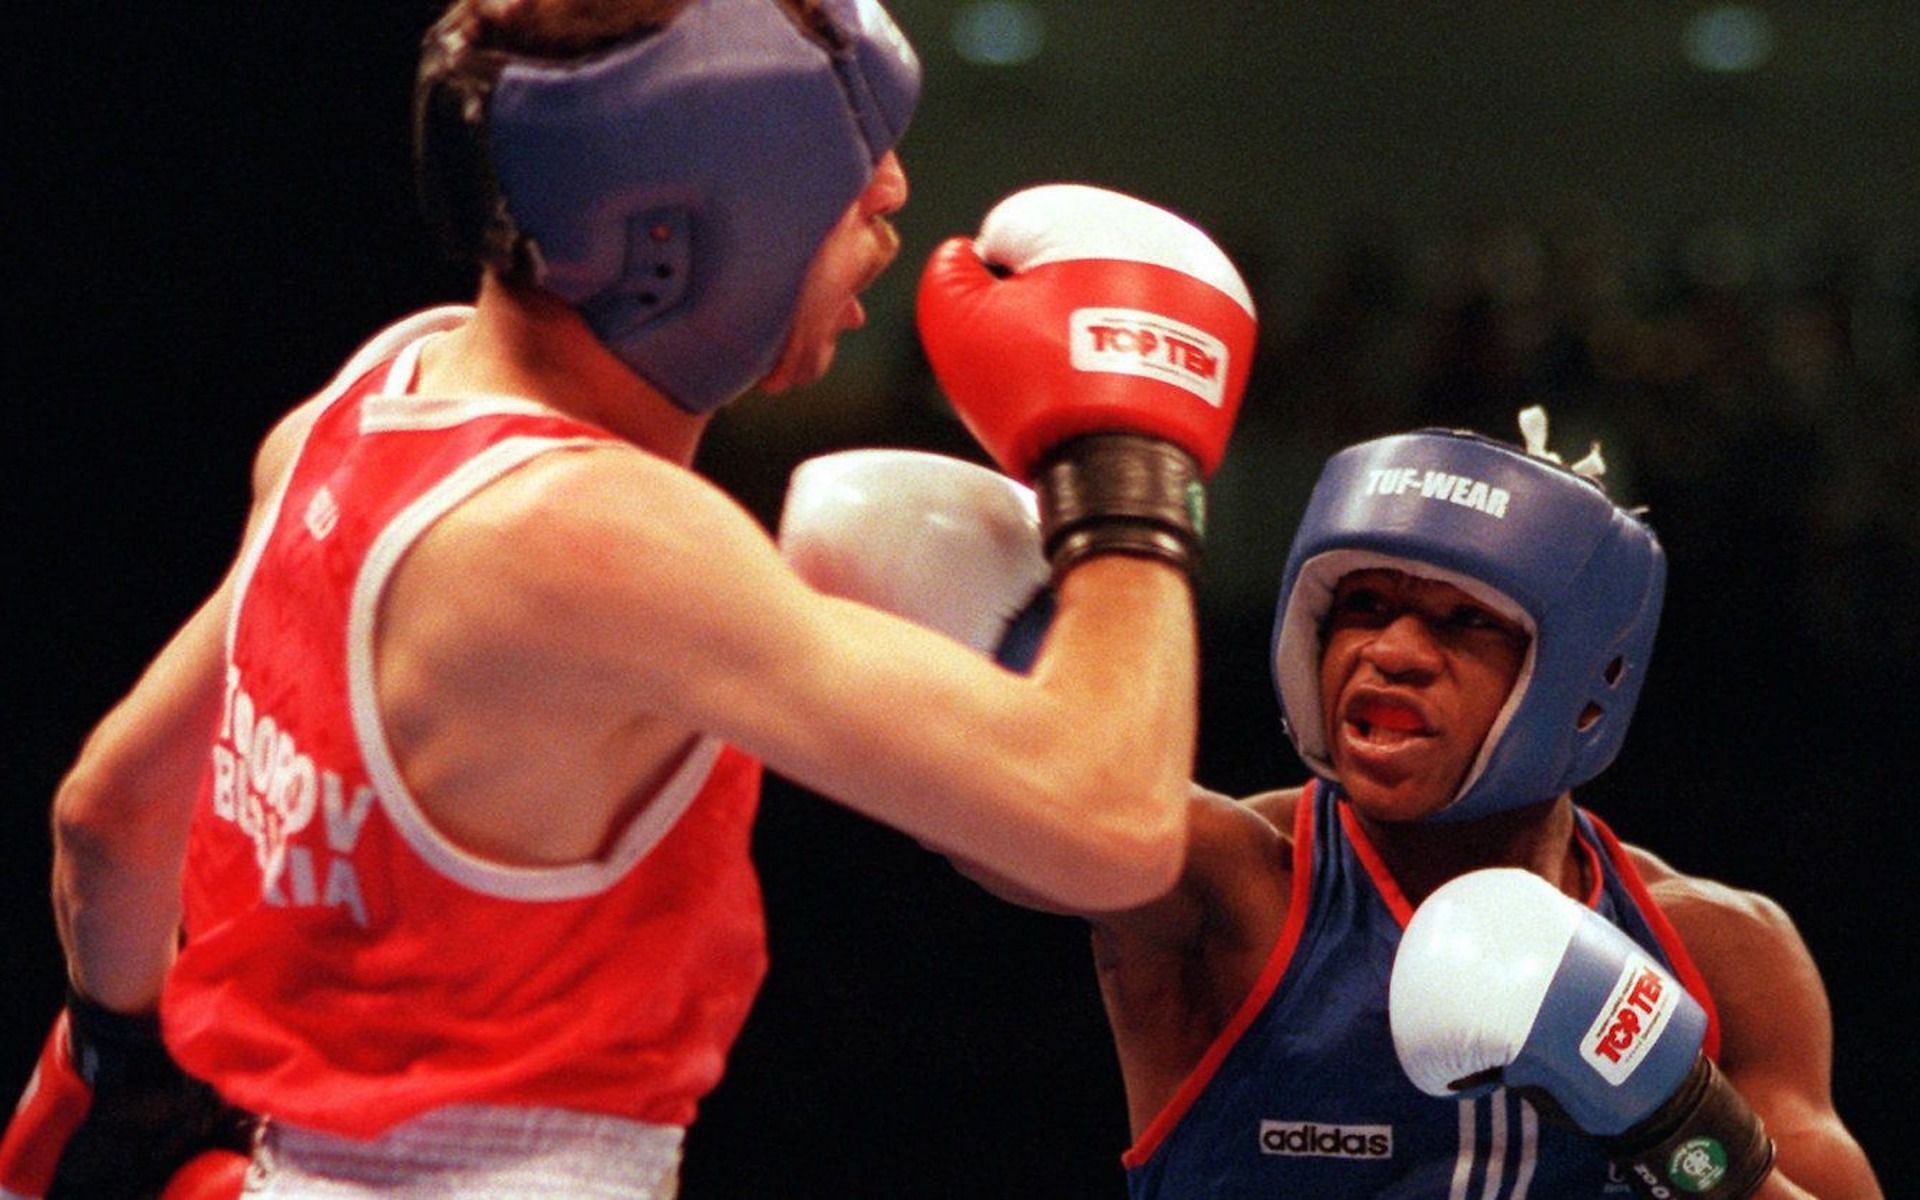 Floyd Mayweather in the Olympics [Image via @GAFollowers on Twitter].